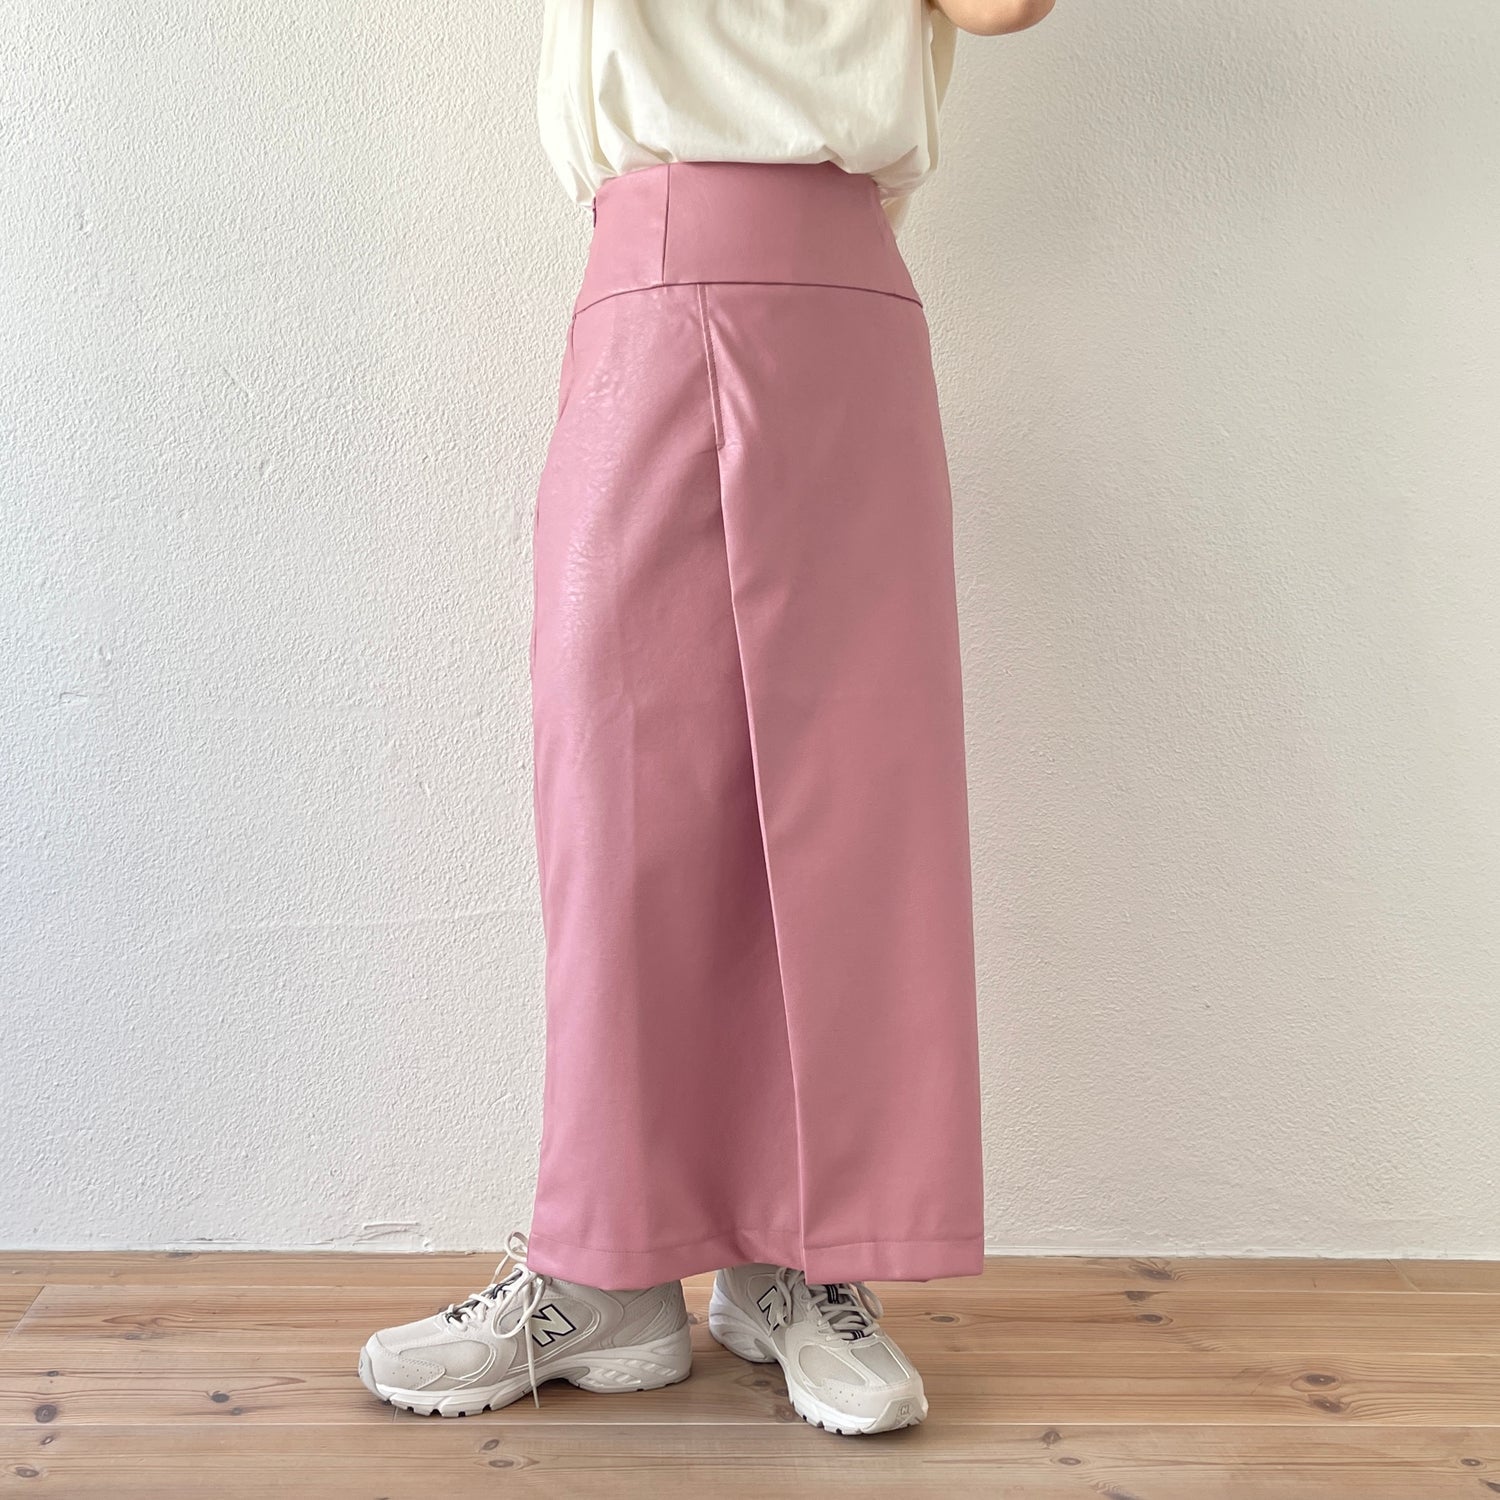 eco leather wrap skirt / pink